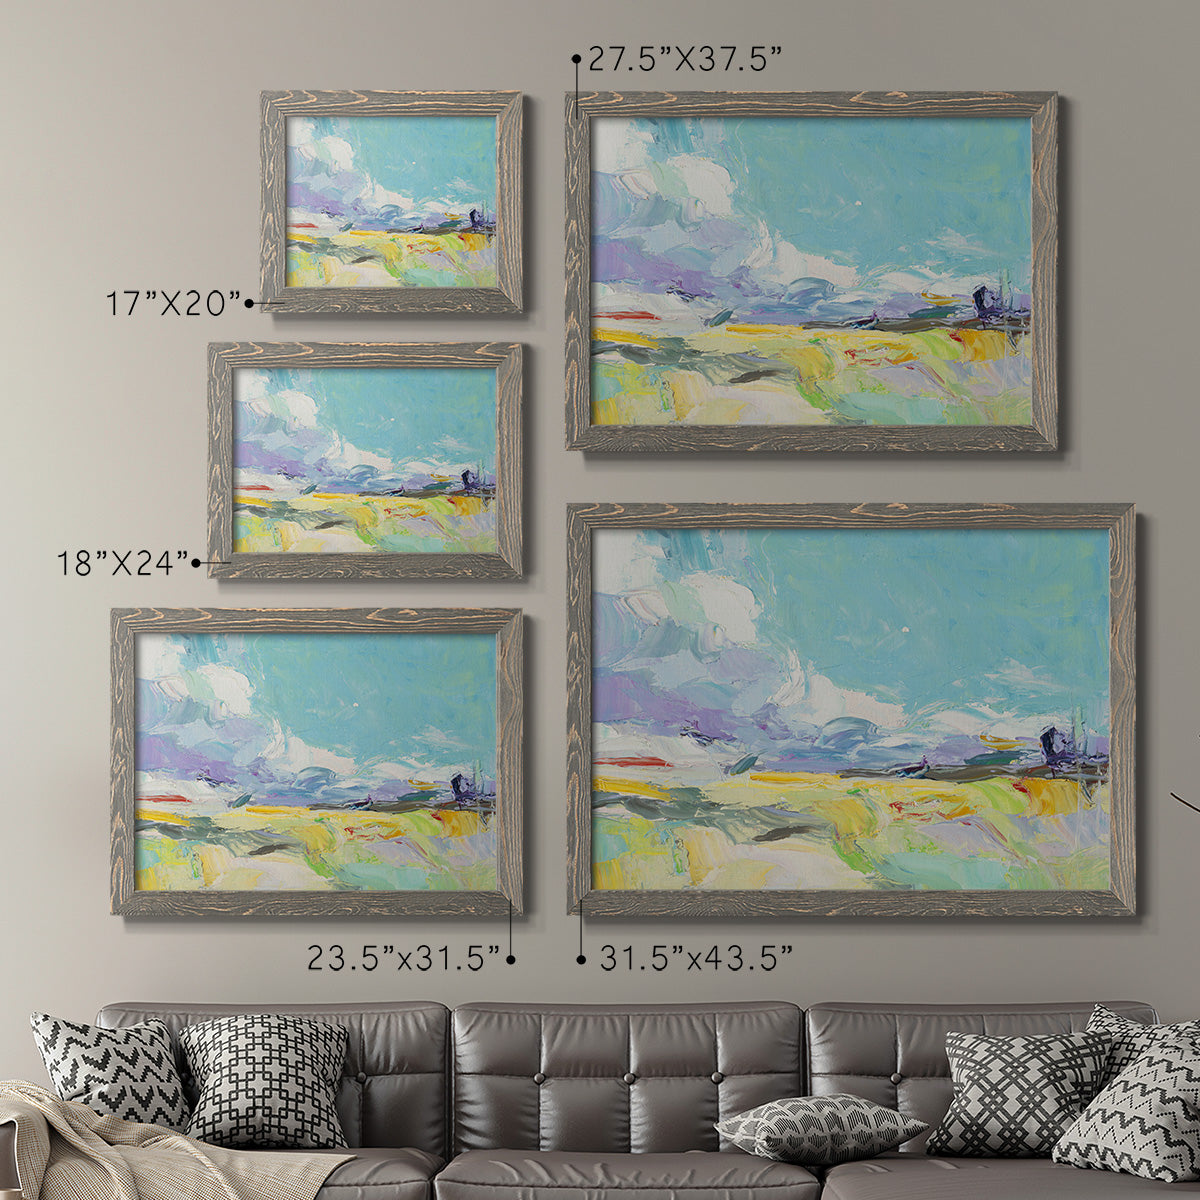 Travels-Premium Framed Canvas - Ready to Hang